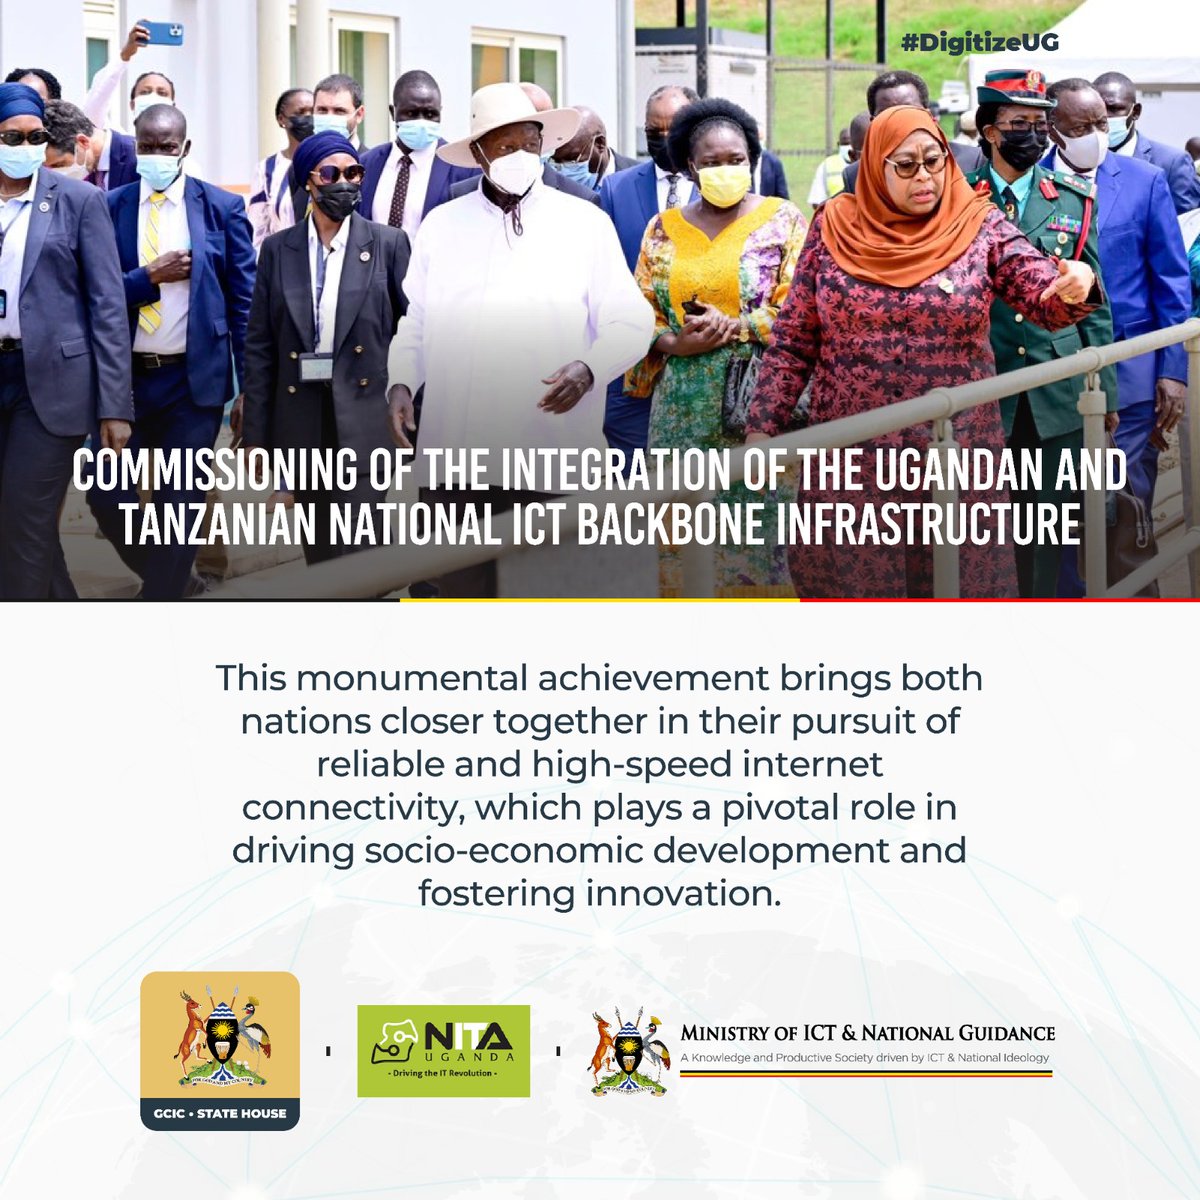 The commissing of the Integration of the Uganda and Tanzania ICT Backbone Infrastructure brings both nations closer together in their pursuit of reliable and high-speed Internet connectivity.

#DigitizeUG